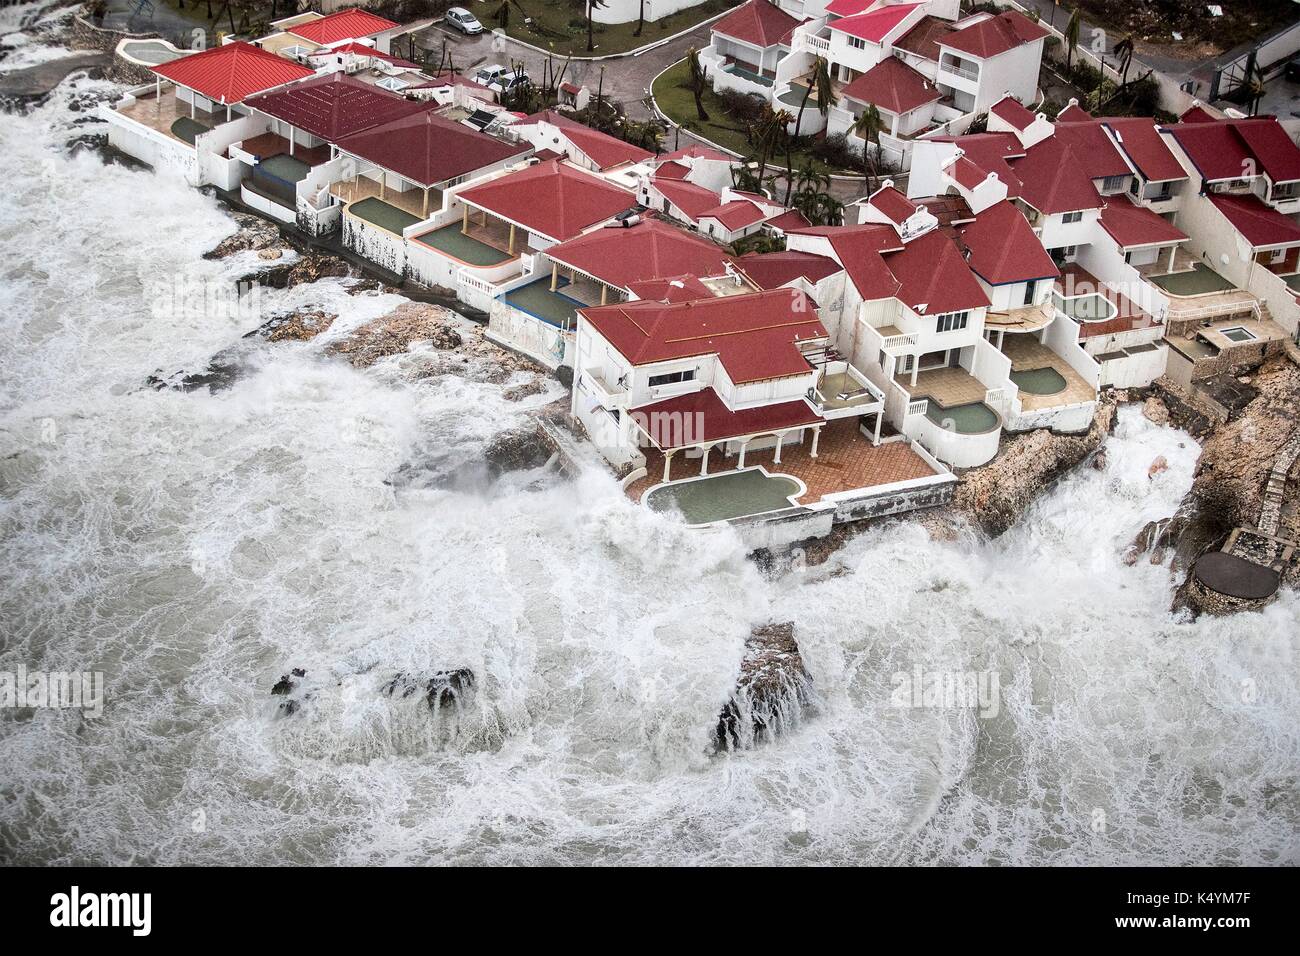 Philipsburg, St Maarten. 06th Sep, 2017. Storm serge and waves lash a resort on the Dutch Island of St. Maarten following a direct hit by Hurricane Irma, a Category 5 storm lashing the Caribbean September 6, 2017 in Philipsburg, St. Maarten. Imra is packing winds of 185-mph making it the strongest hurricane ever recorded in the Atlantic Ocean. (Gerben Van Es/Netherlands Defence Ministry via Planetpix) Stock Photo